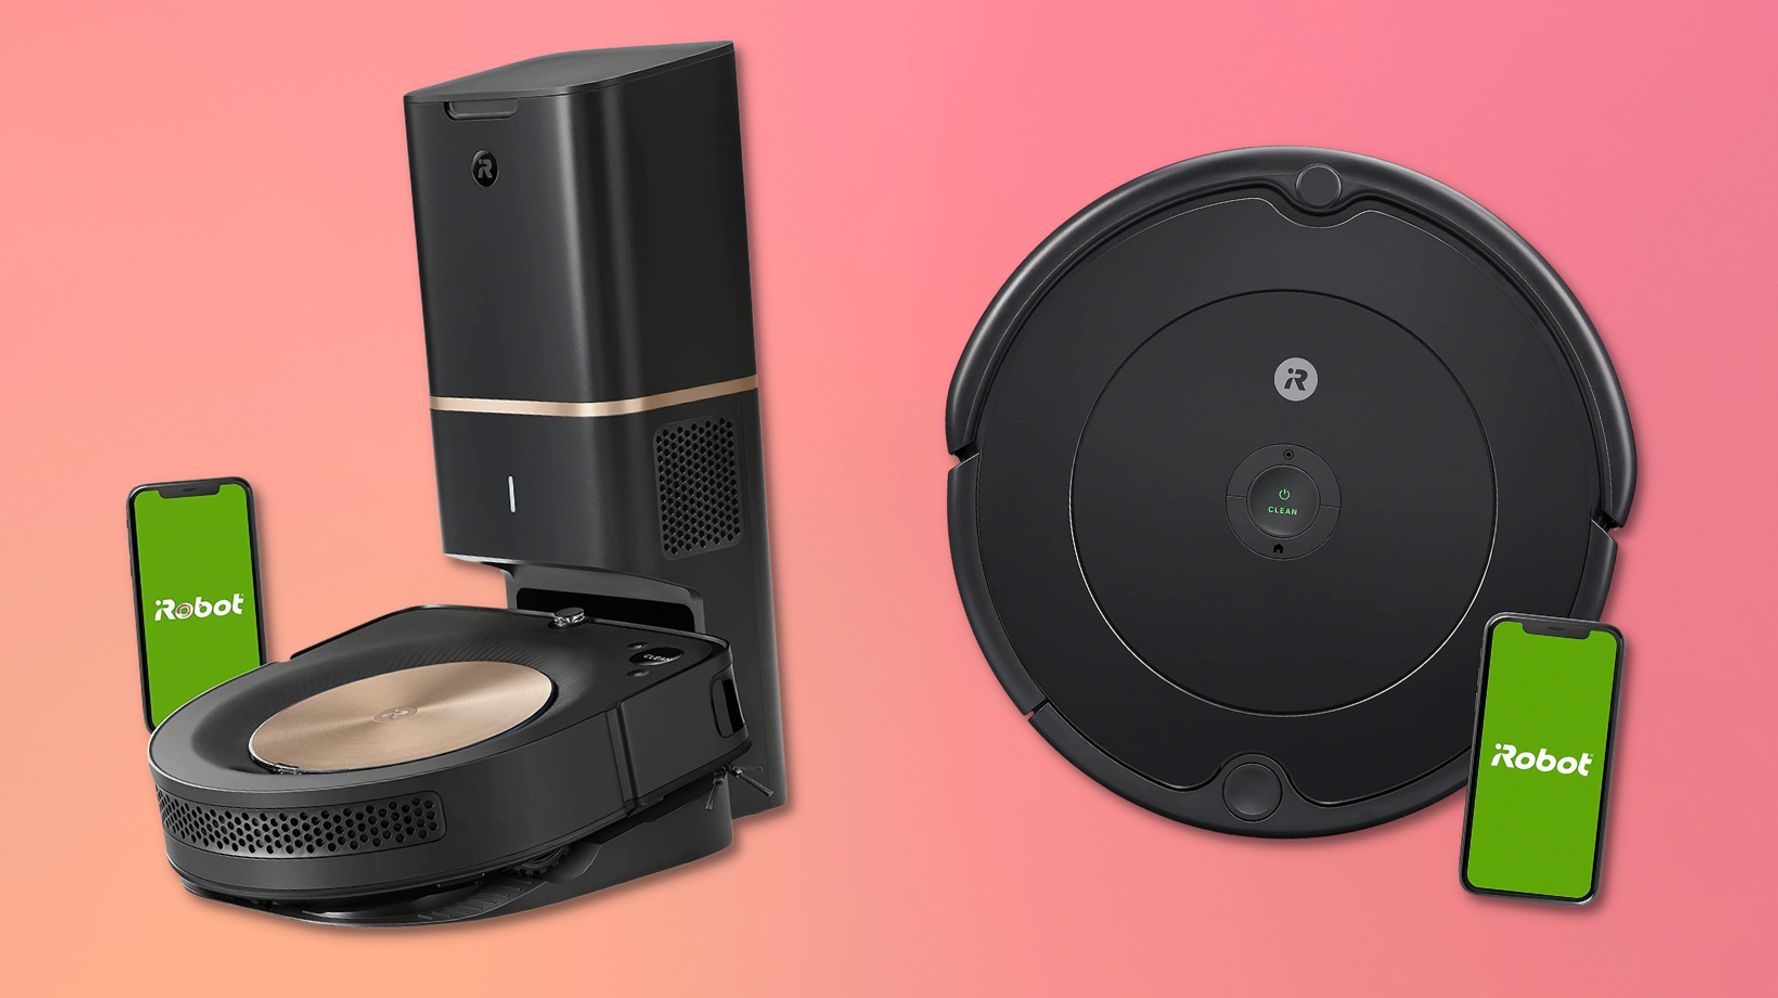 The iRobot Roomba J7 Robot Vacuum Is 33% Off at